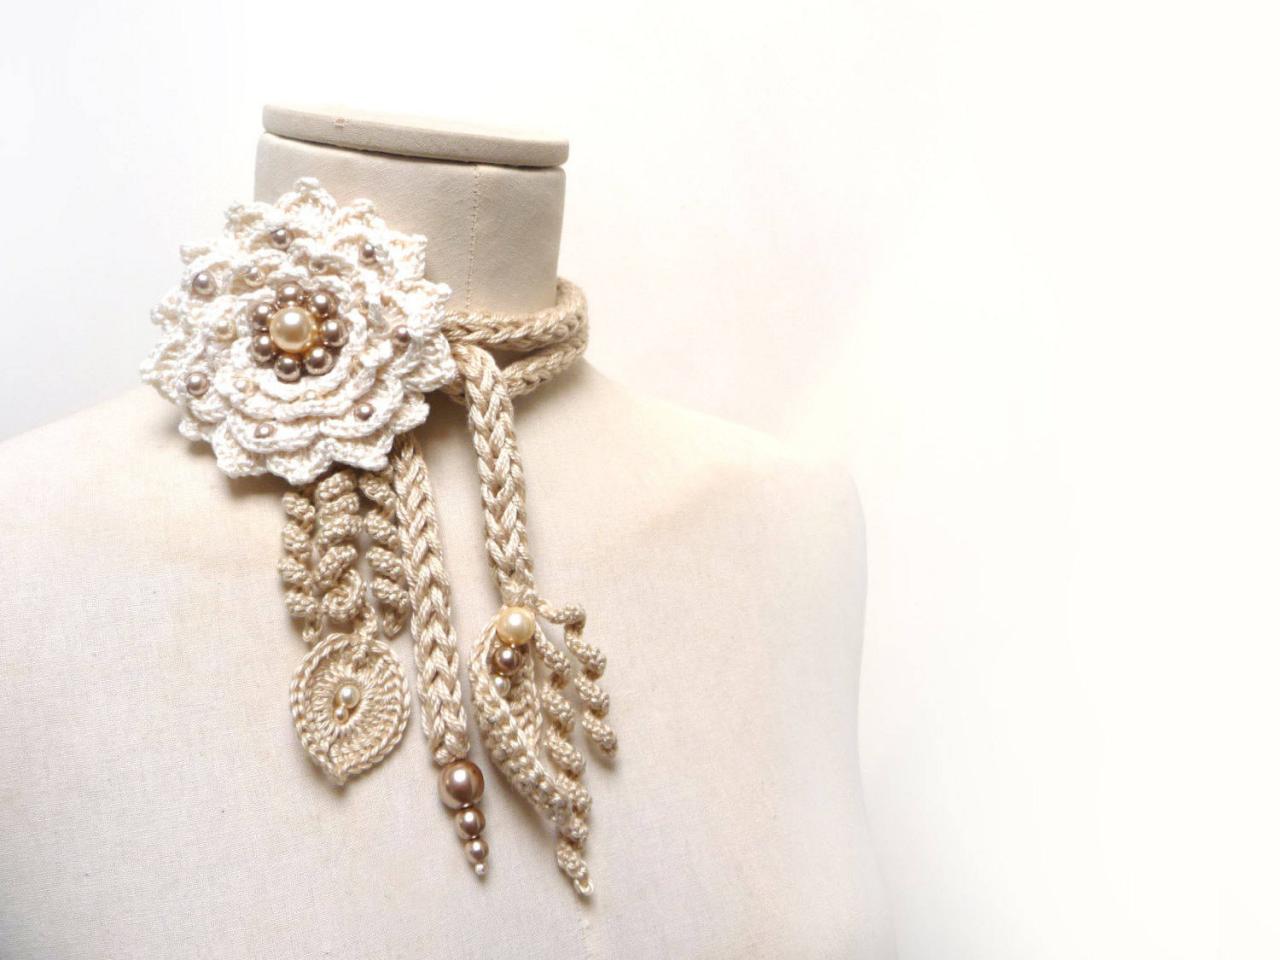 Crochet Cotton Lariat Necklace - Light Beige / Sand Leaves And Cream White Flower With Glass Pearls - Little Peony - Custom Color